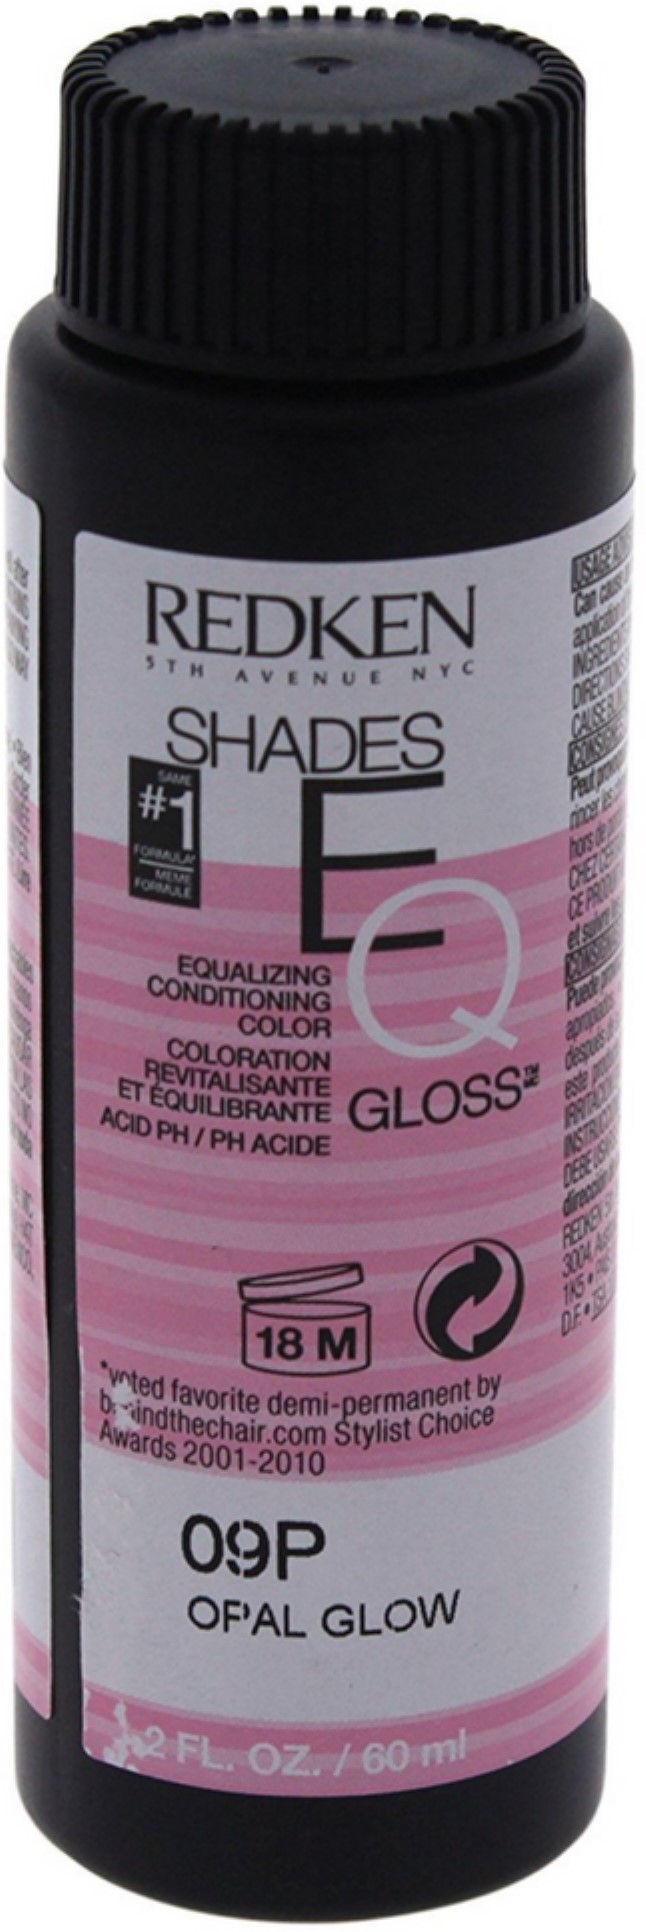 4 Pack - Redken Shades EQ Hair Color Gloss, 09P Opal Glow 2 oz - image 1 of 1